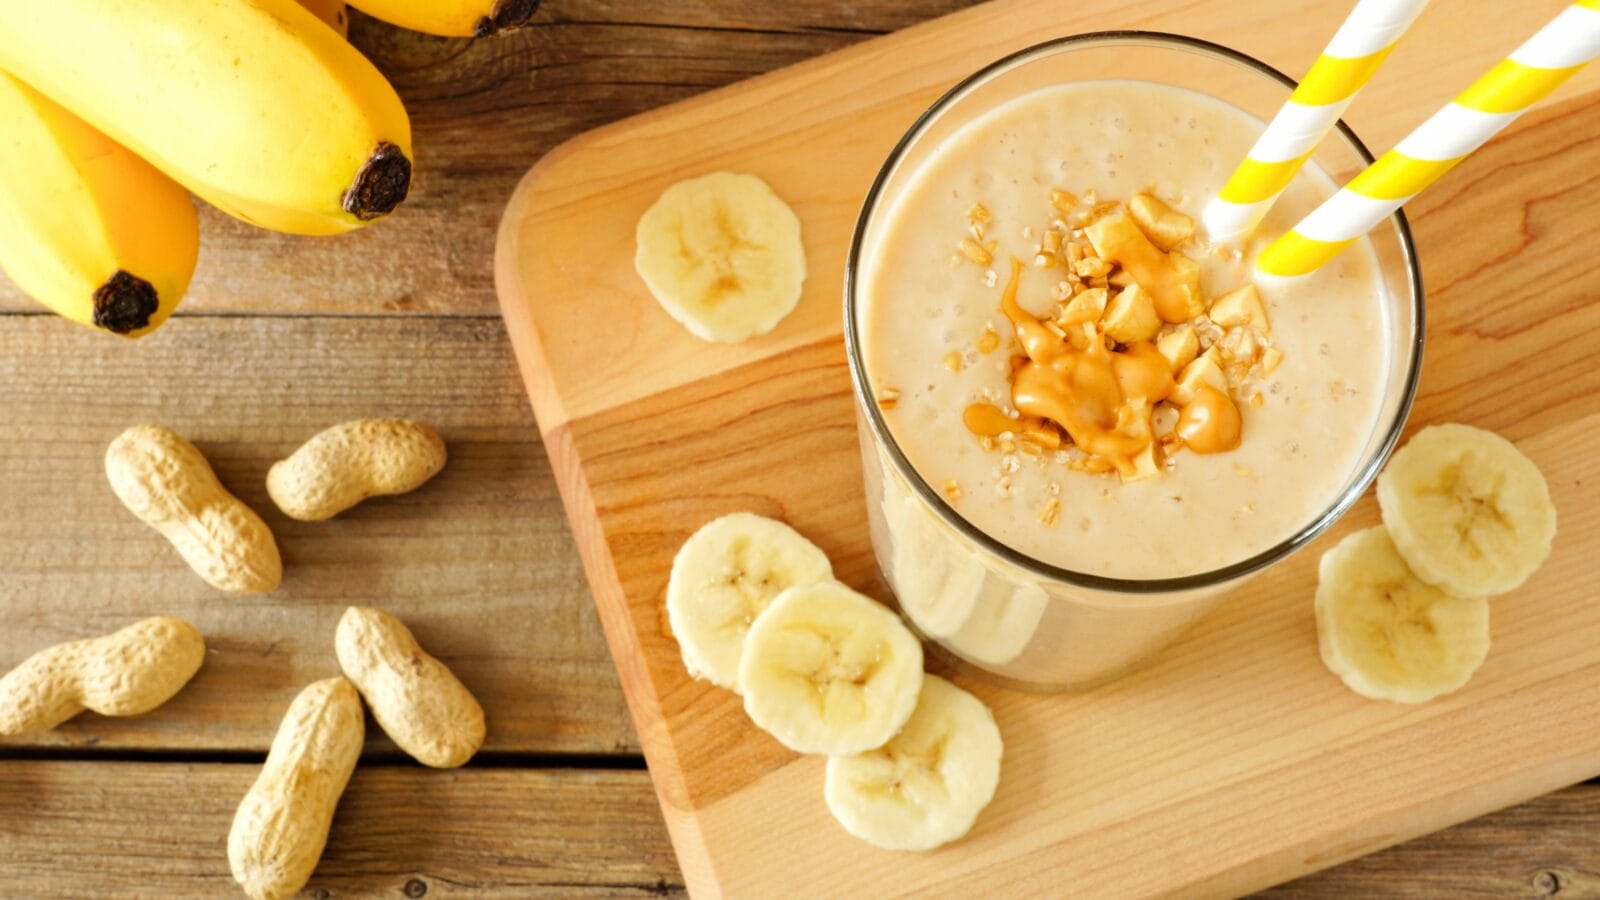 Peanut butter banana oat smoothie with paper straws, on a wood board on rustic table